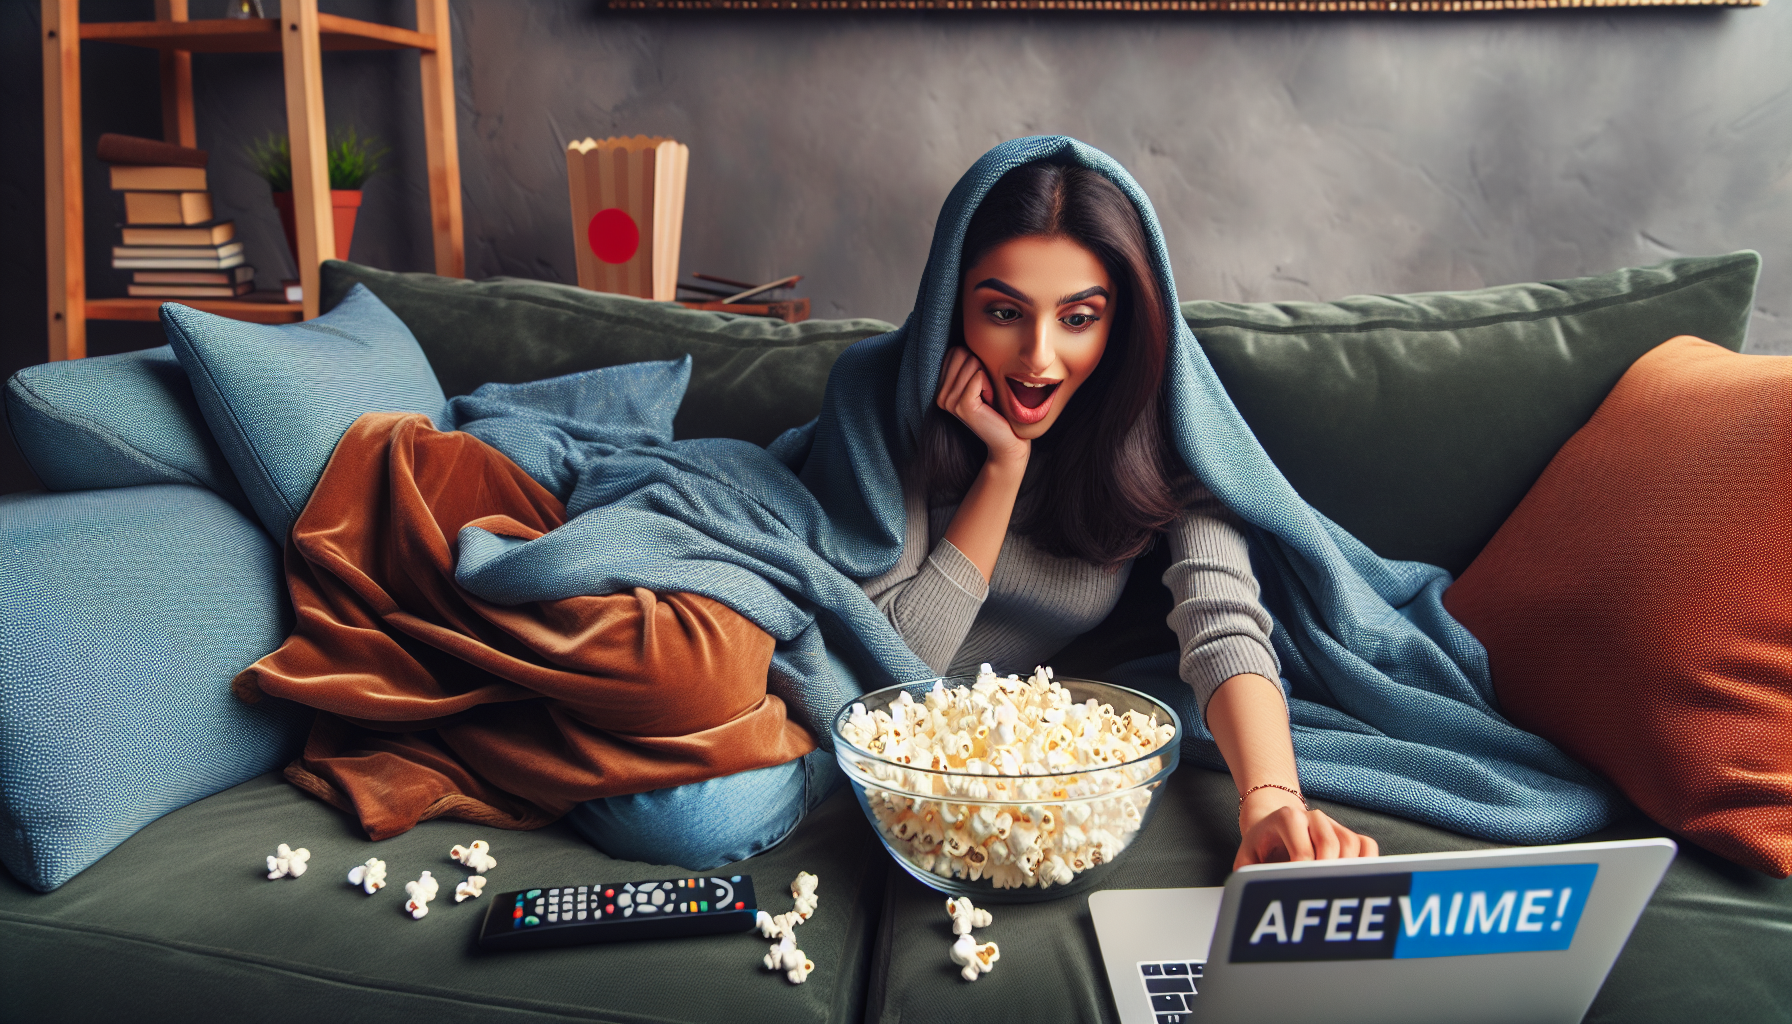 get ready for the ultimate weekend binge with the hottest new movies and tv shows on netflix, hulu, prime video, and more! explore an exciting mix of entertainment options for your perfect weekend escape.